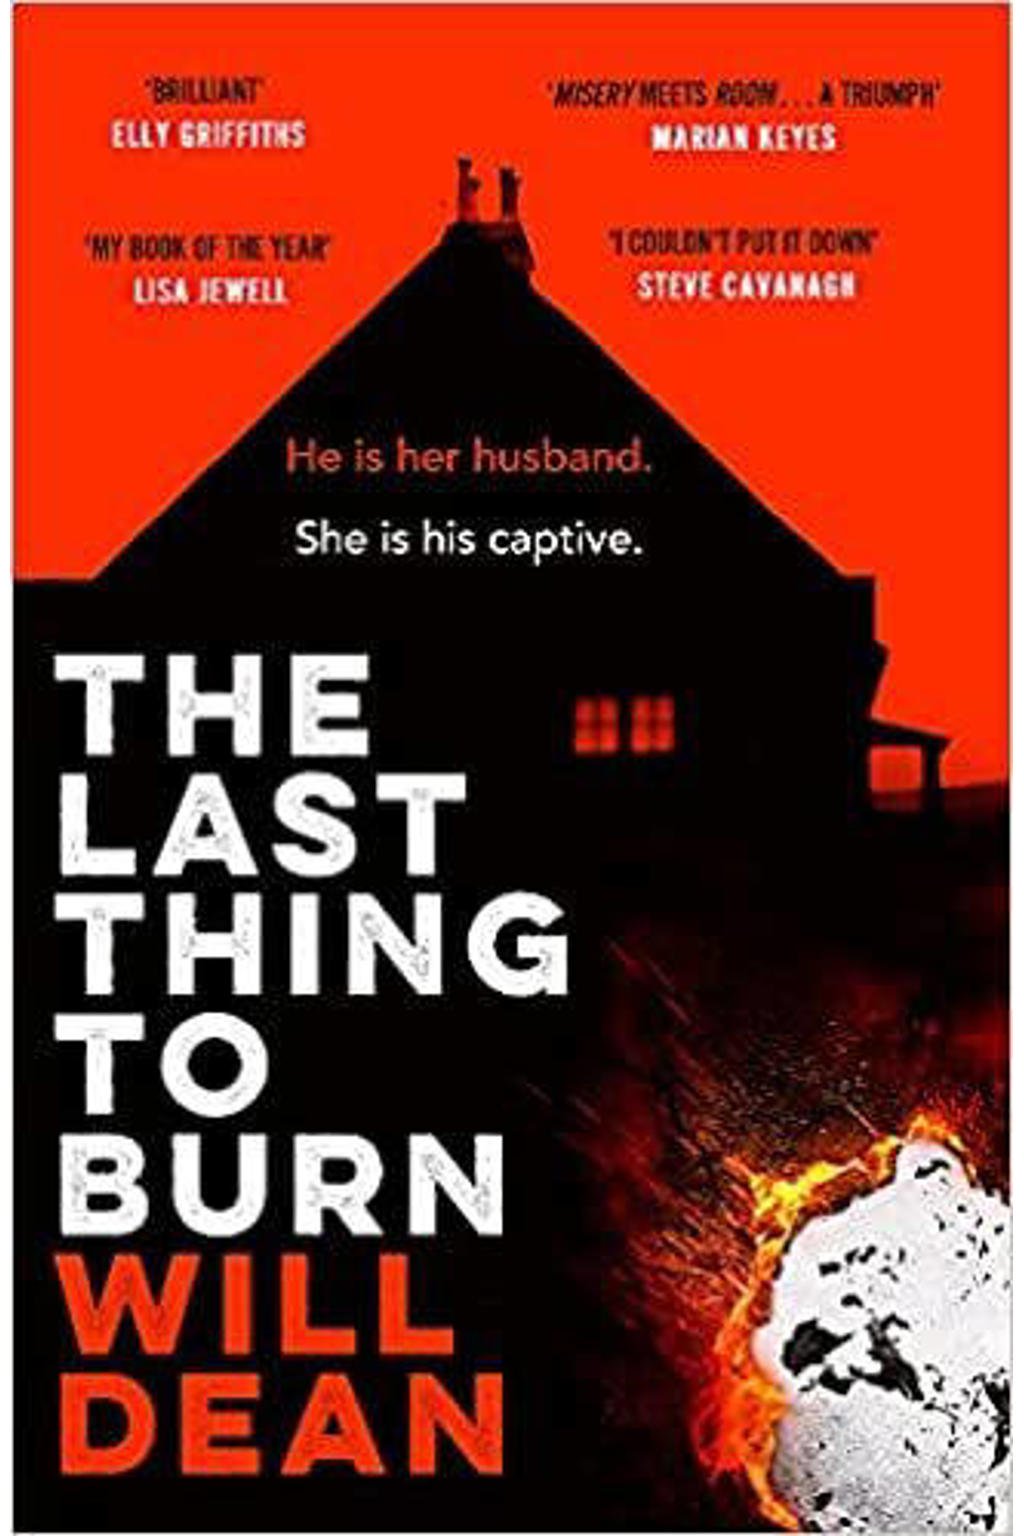 The Last Thing to Burn - Dean, Will